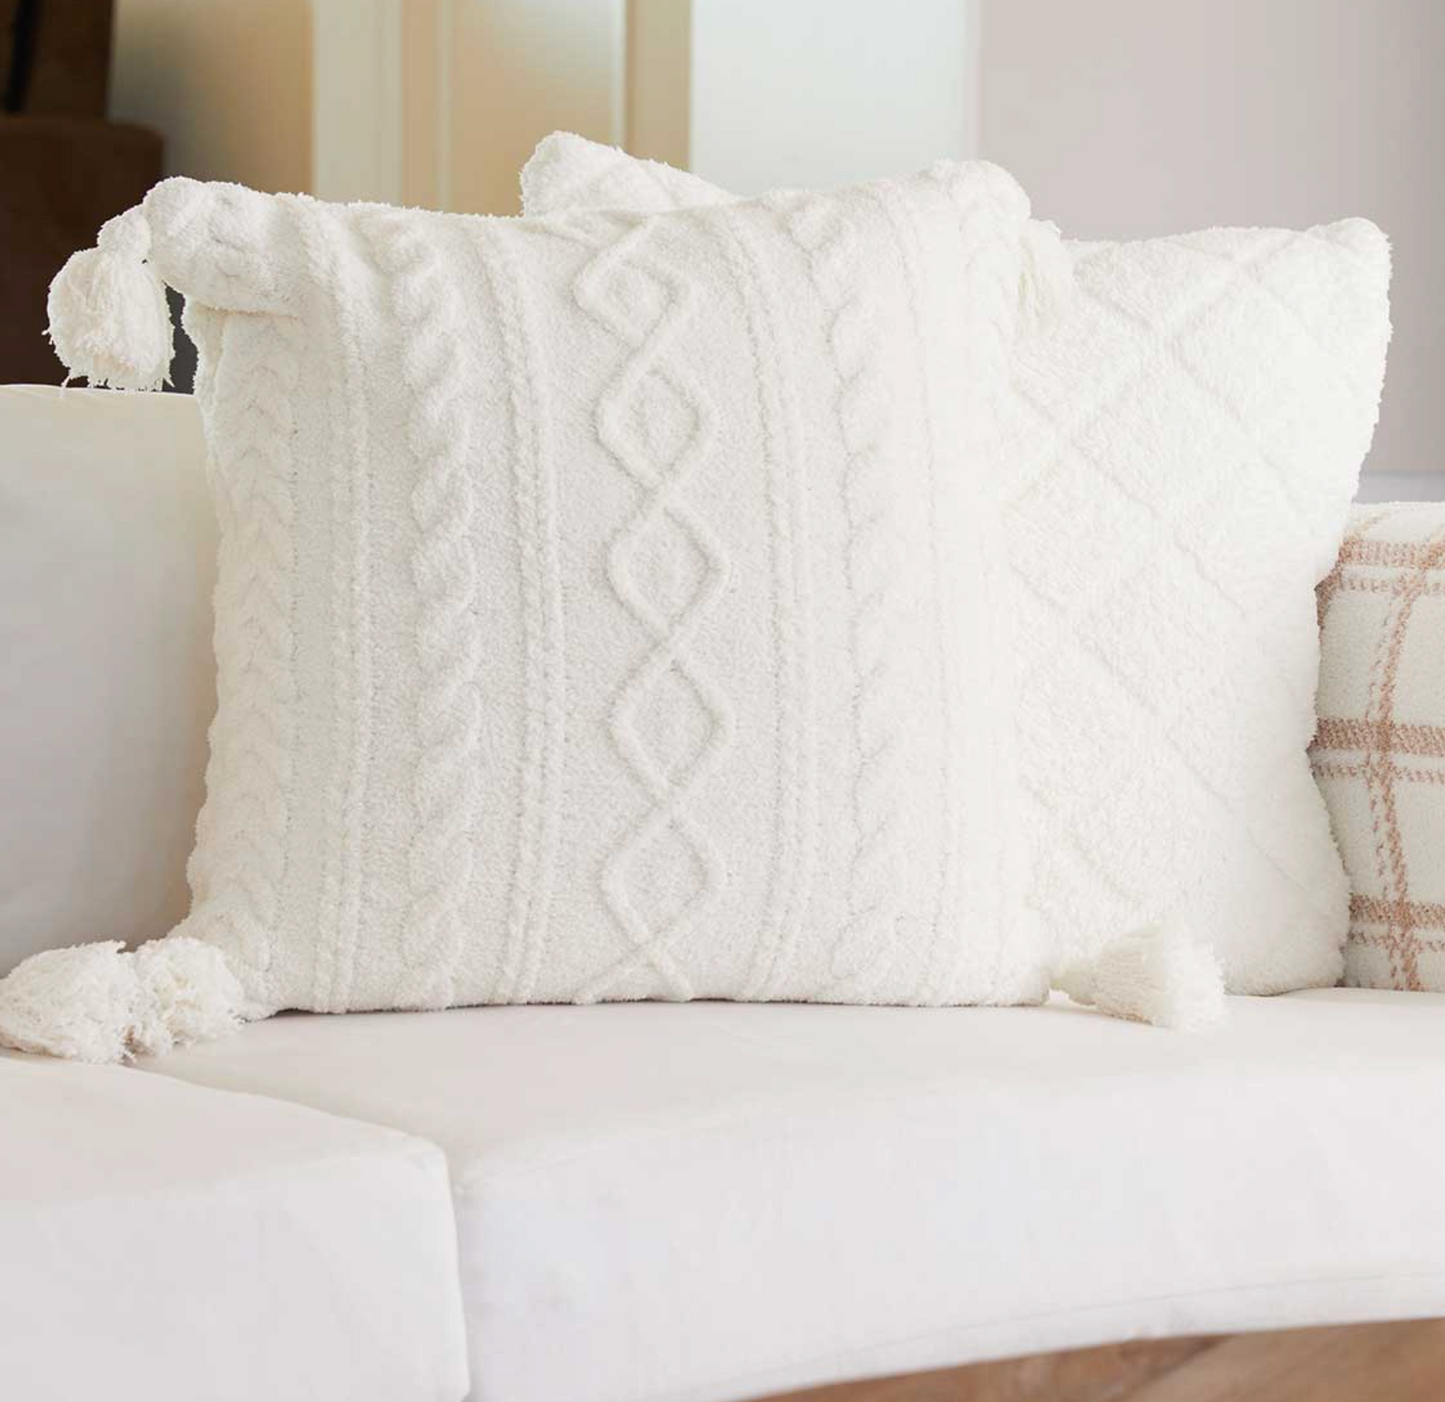 CozyChic Cable Pillow